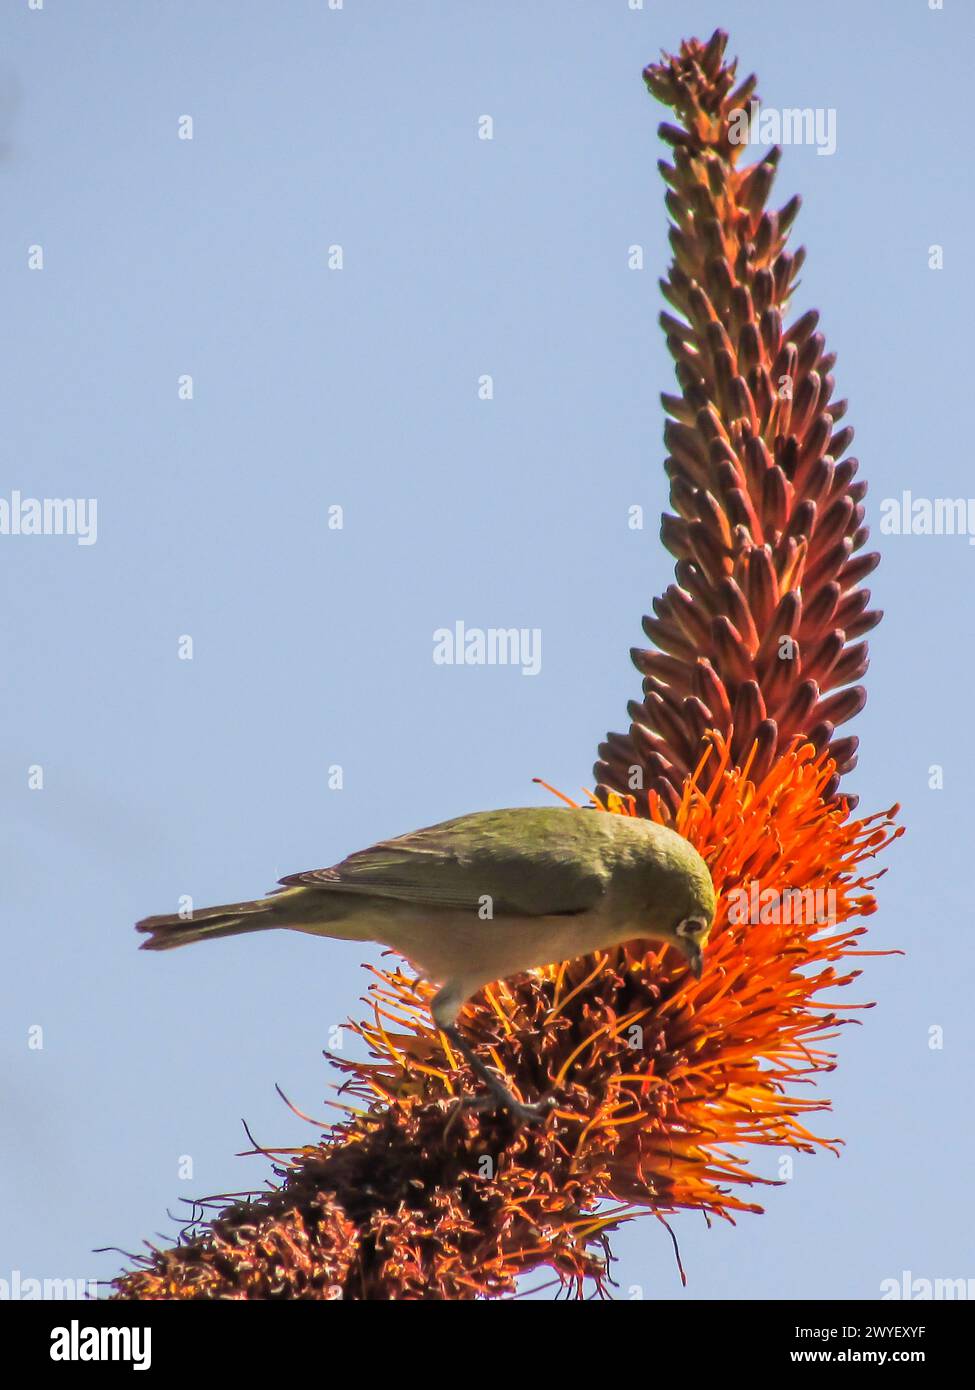 An Orange River White-eye, Zosterops pallidus, feeding on the Orange Flowers of an Aloe, in Augrabies National Park in South Africa Stock Photo